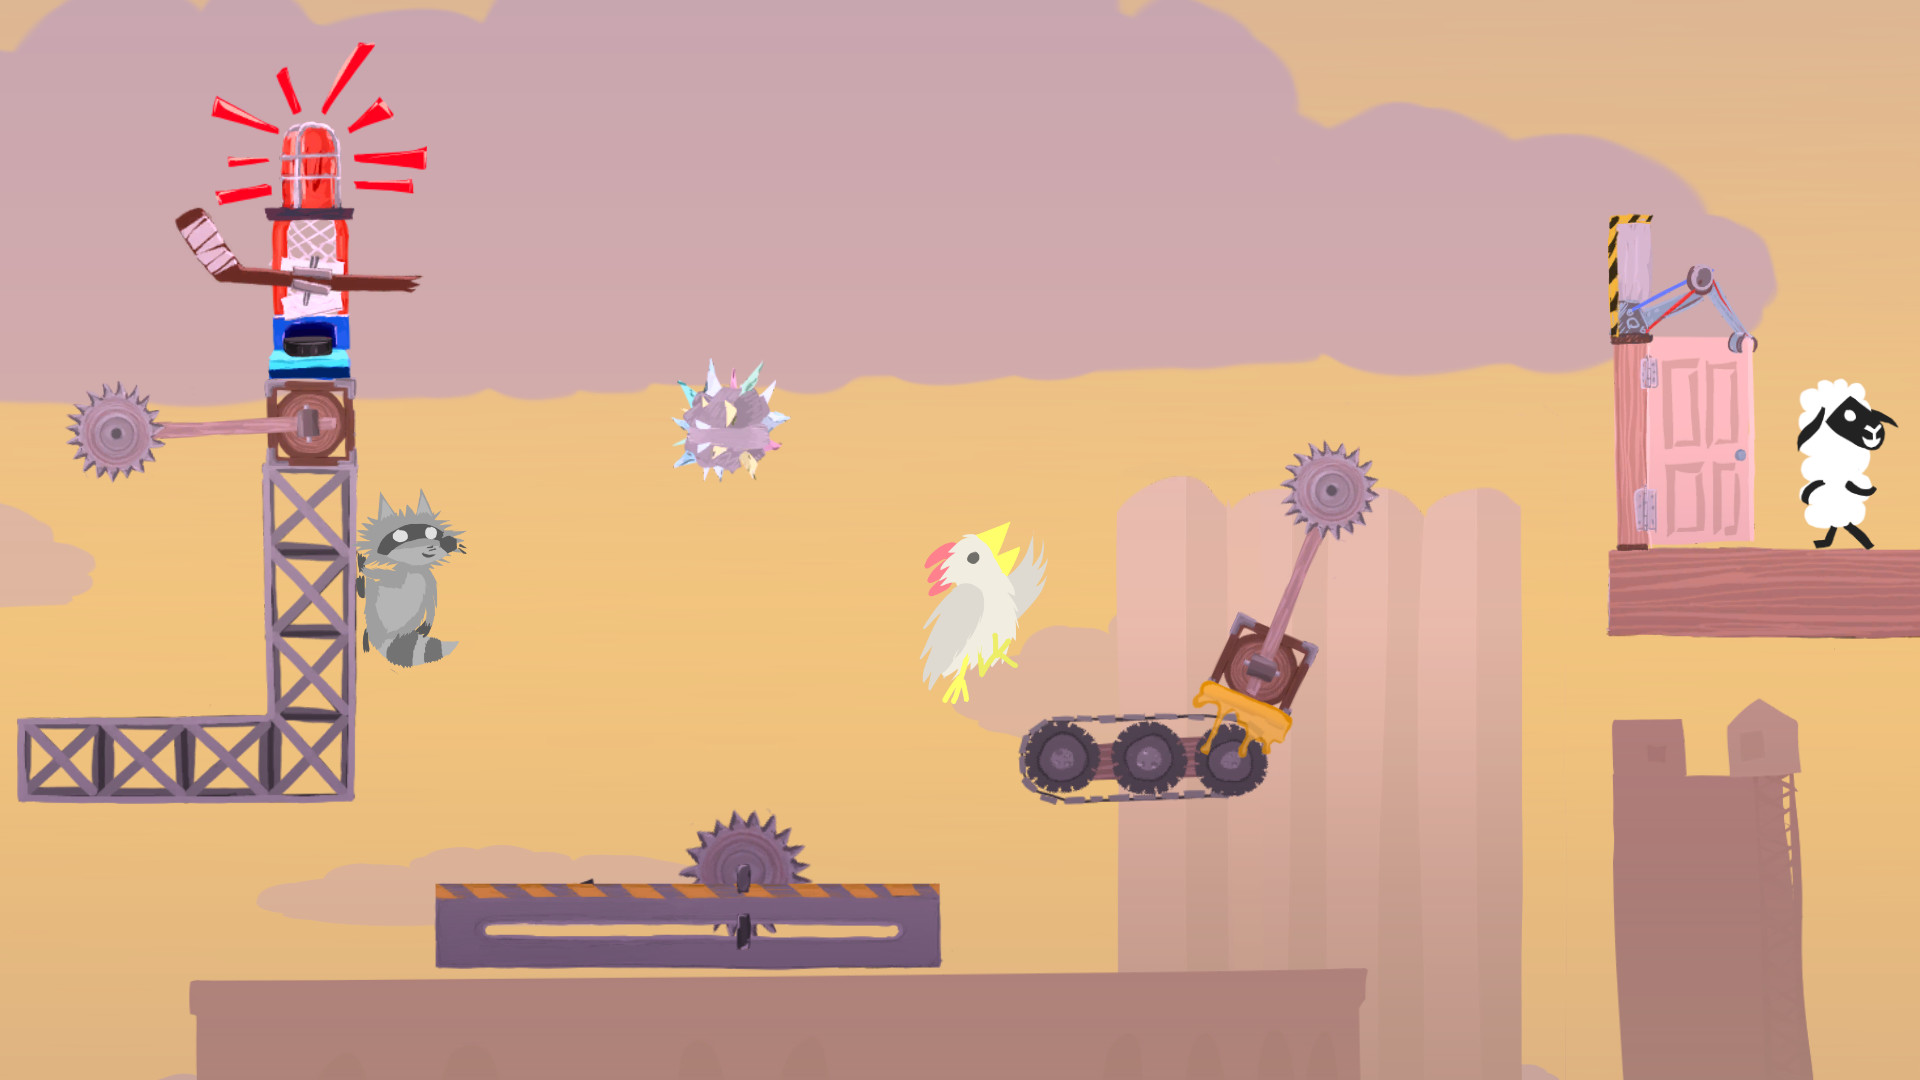 Ultimate Chicken Horse Images 